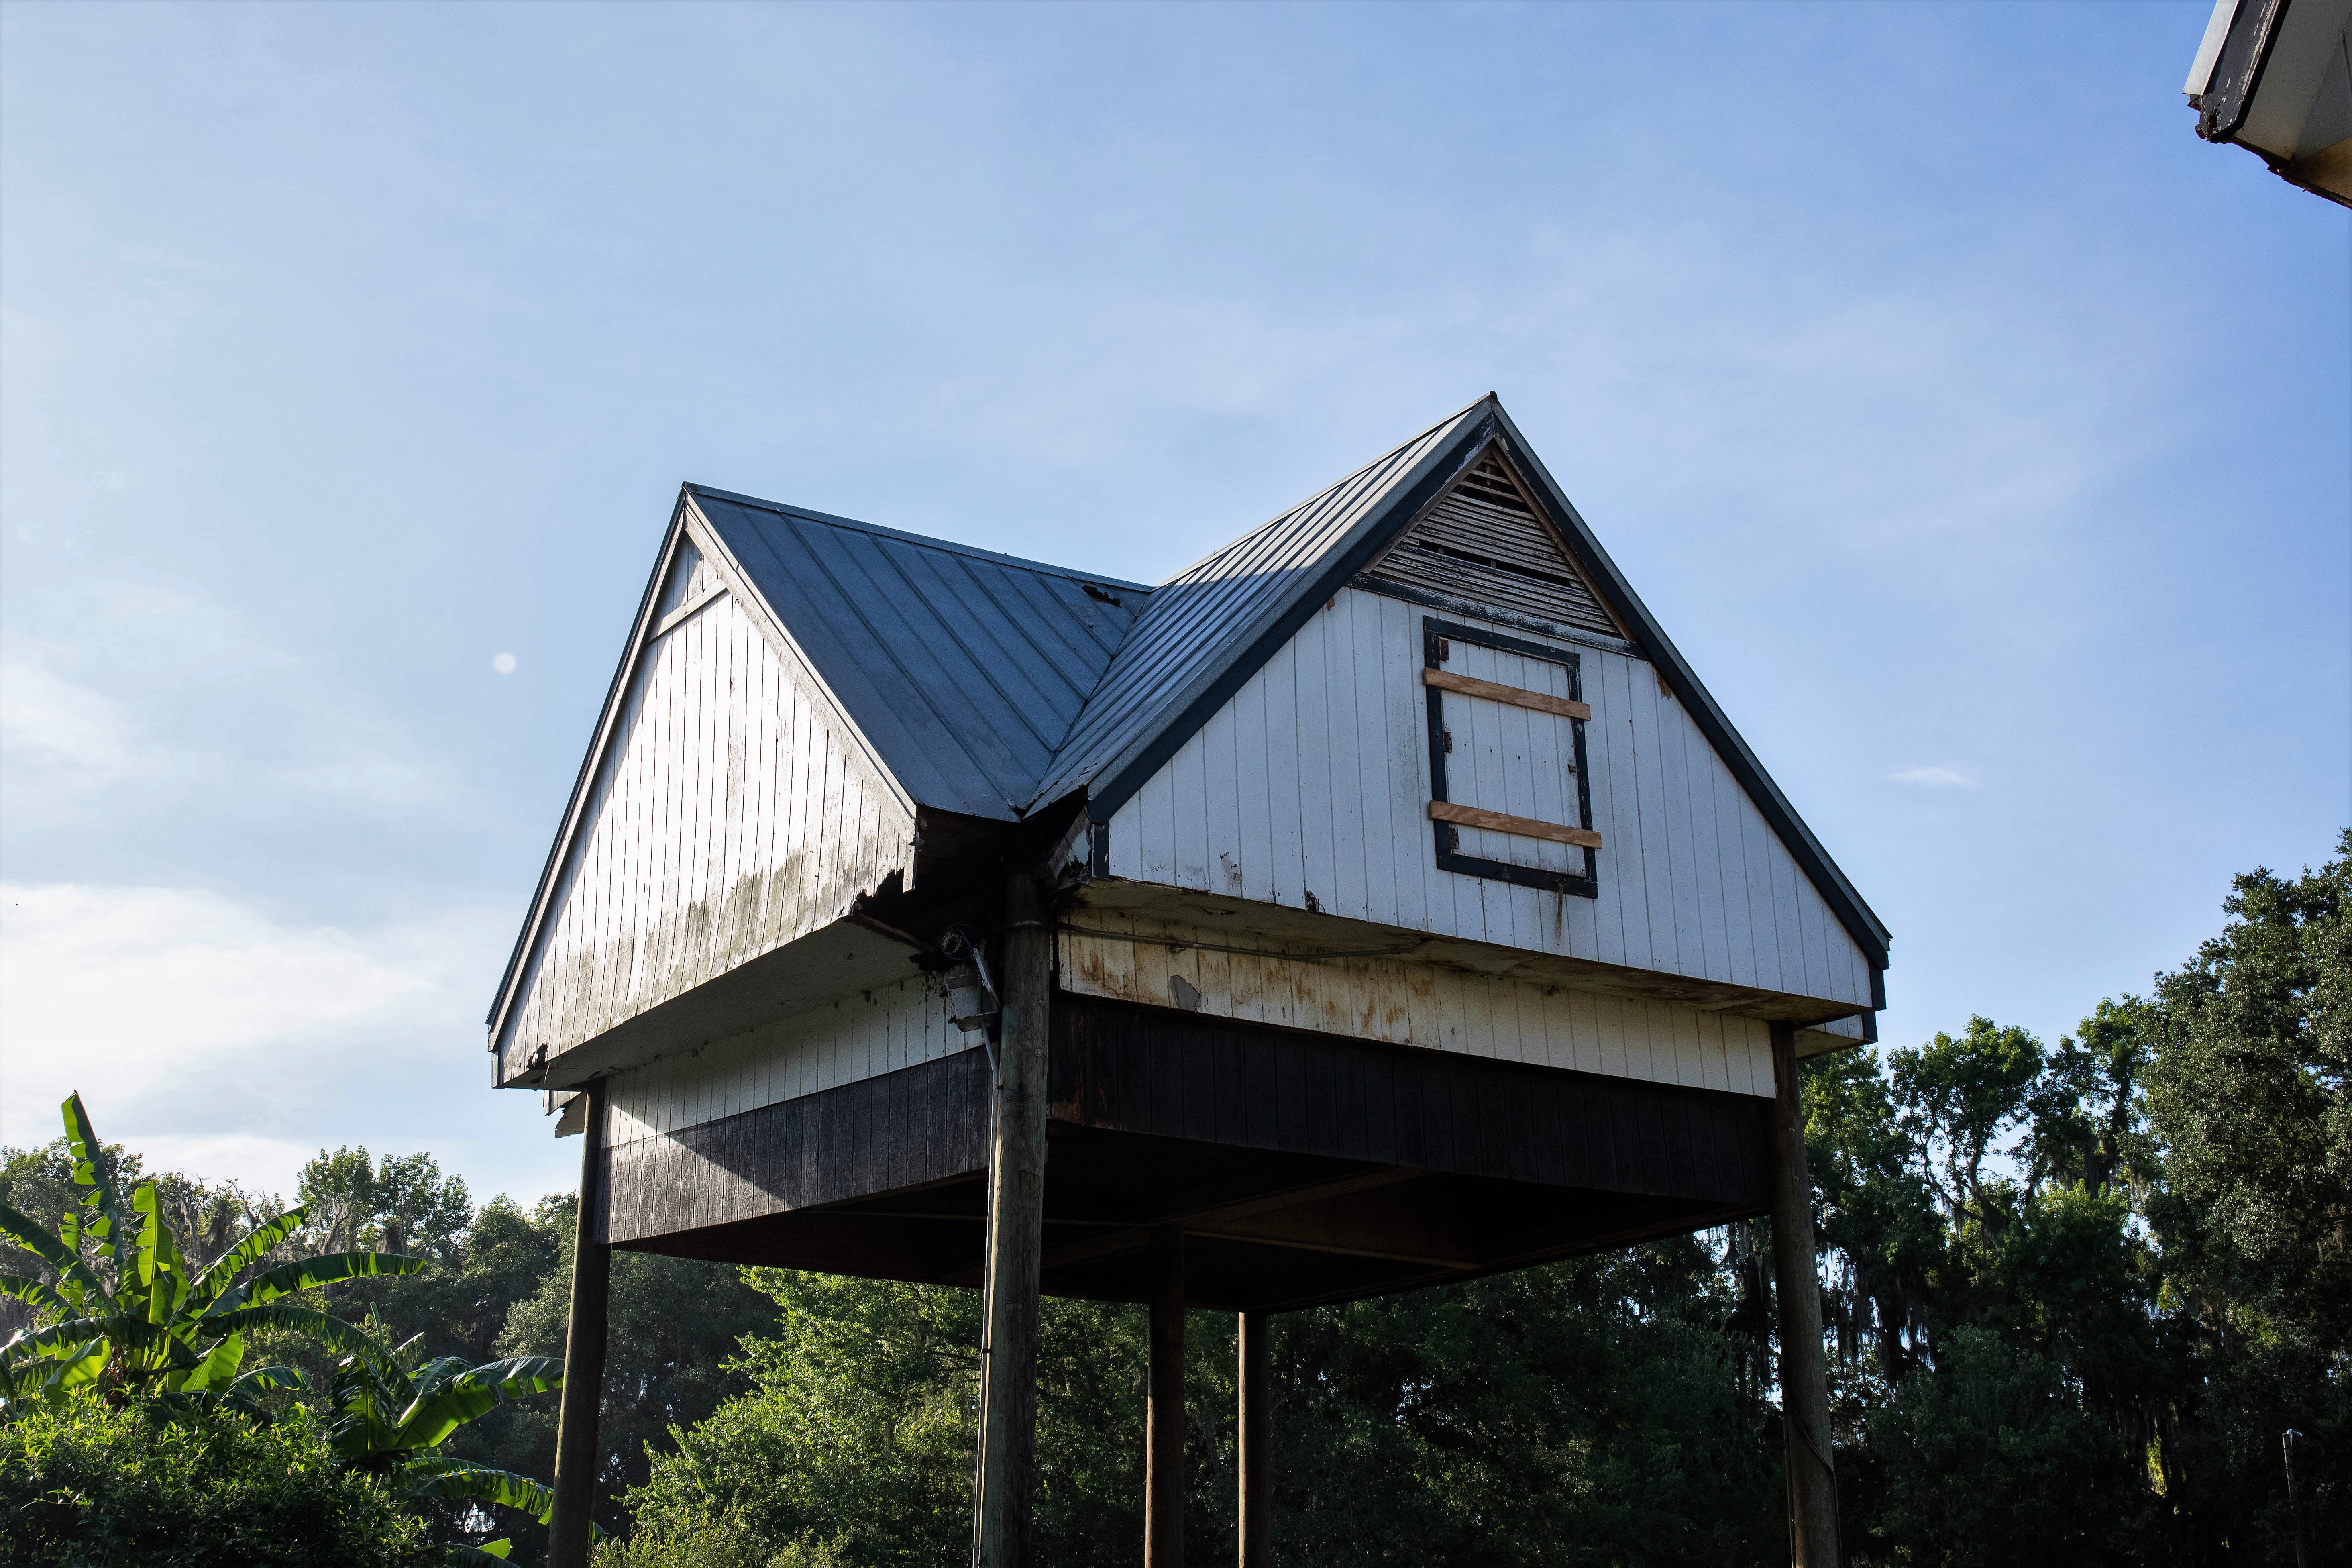 <p>The University of Florida's original bat house was built in 1991 and is in need of reconstruction. Photo: Bri Lehan/UF</p>